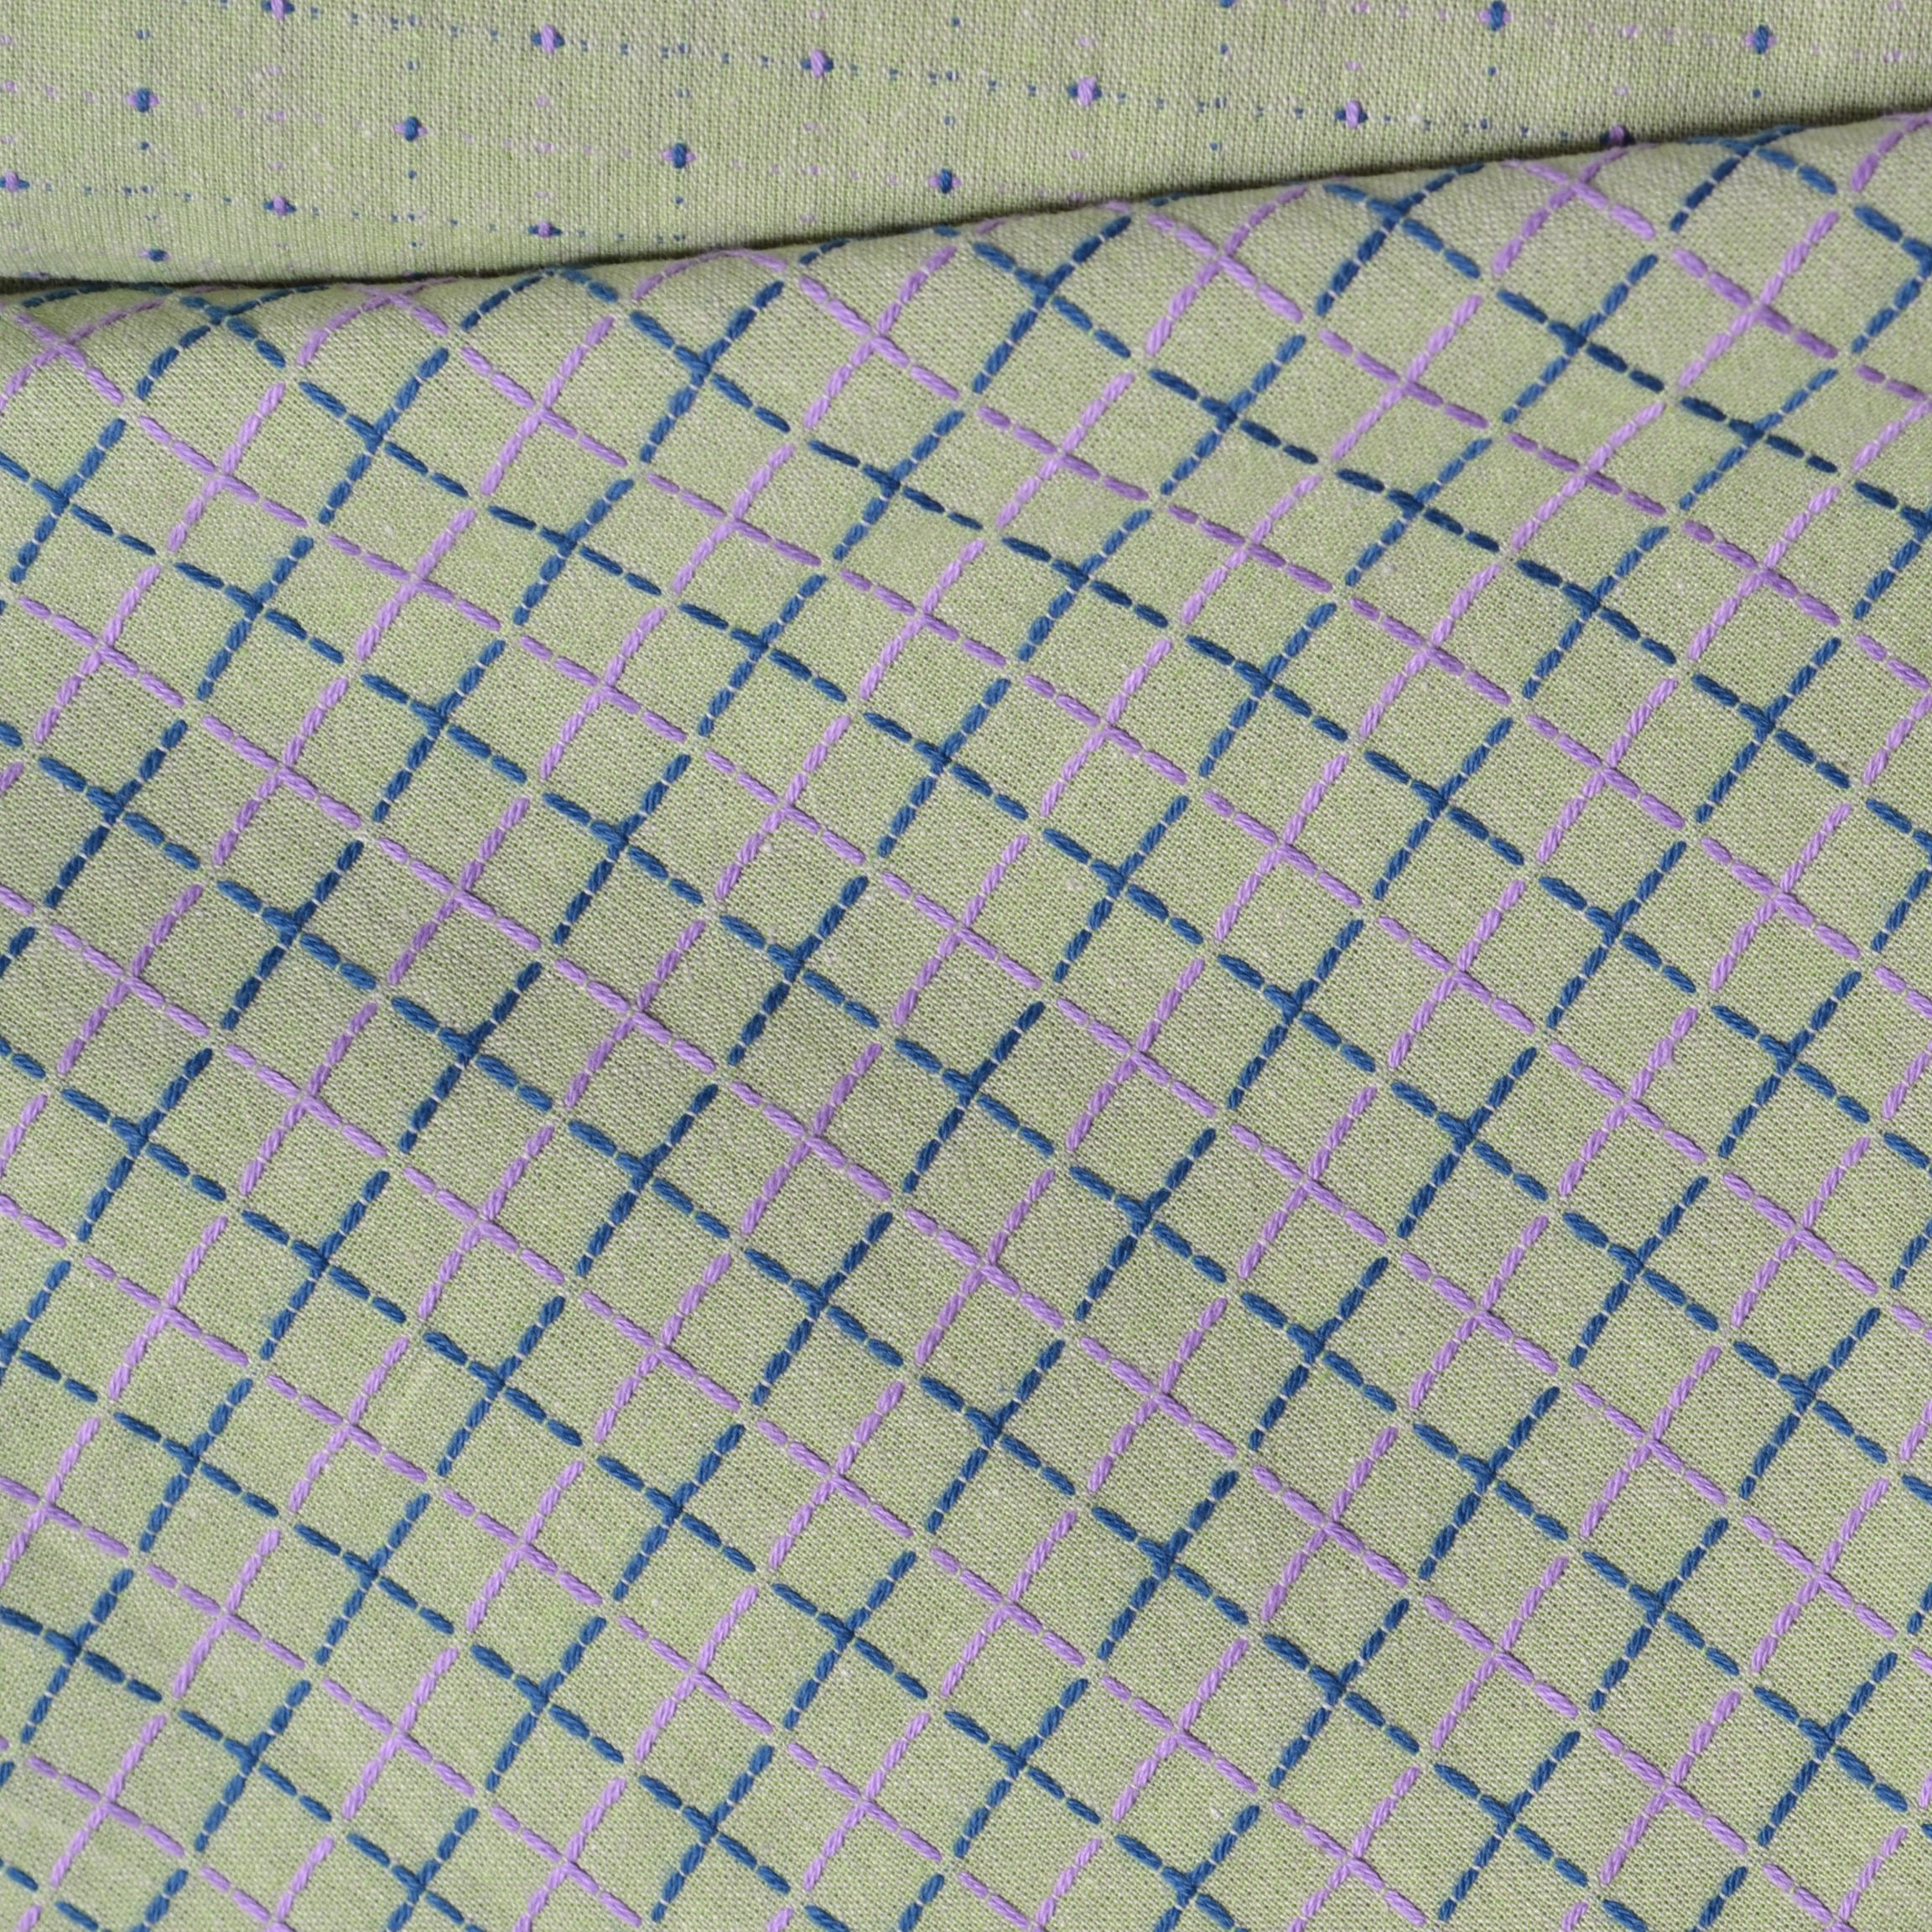 back of dyed yarn cotton sewing, quilting fabric